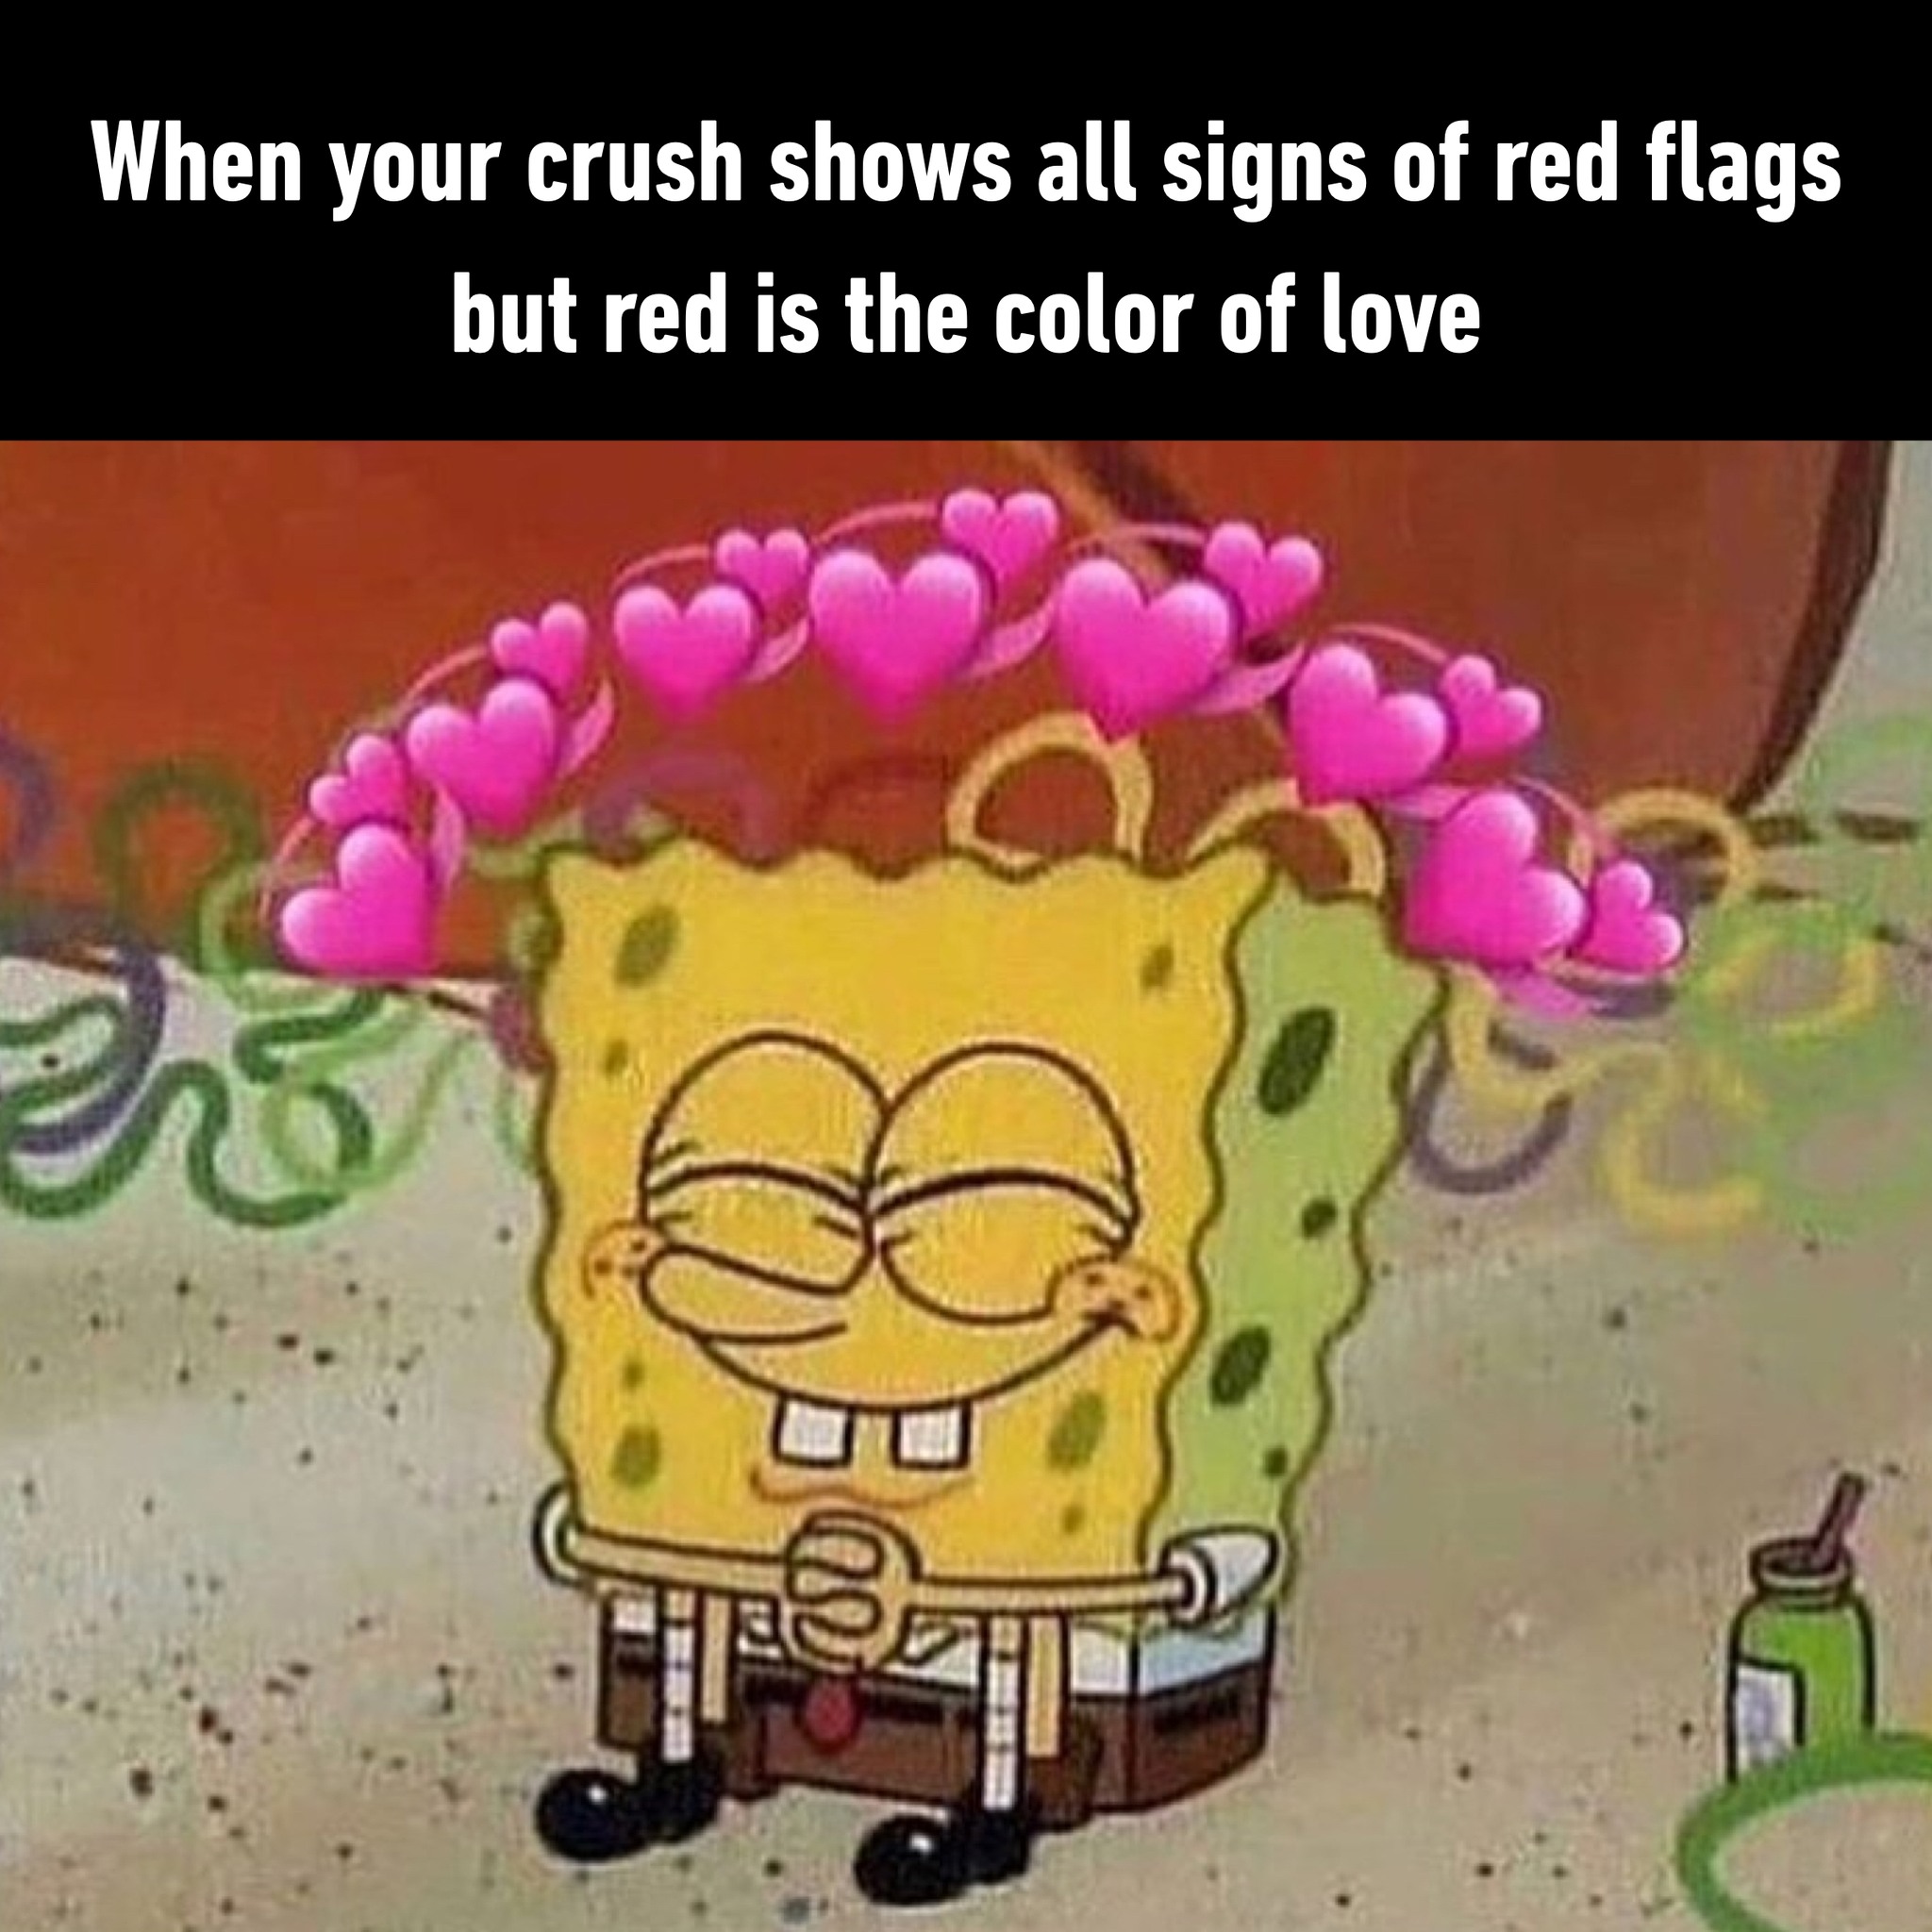 when your crush shows all signs of red flags but red is the color of love, spongebob squarepants, meme